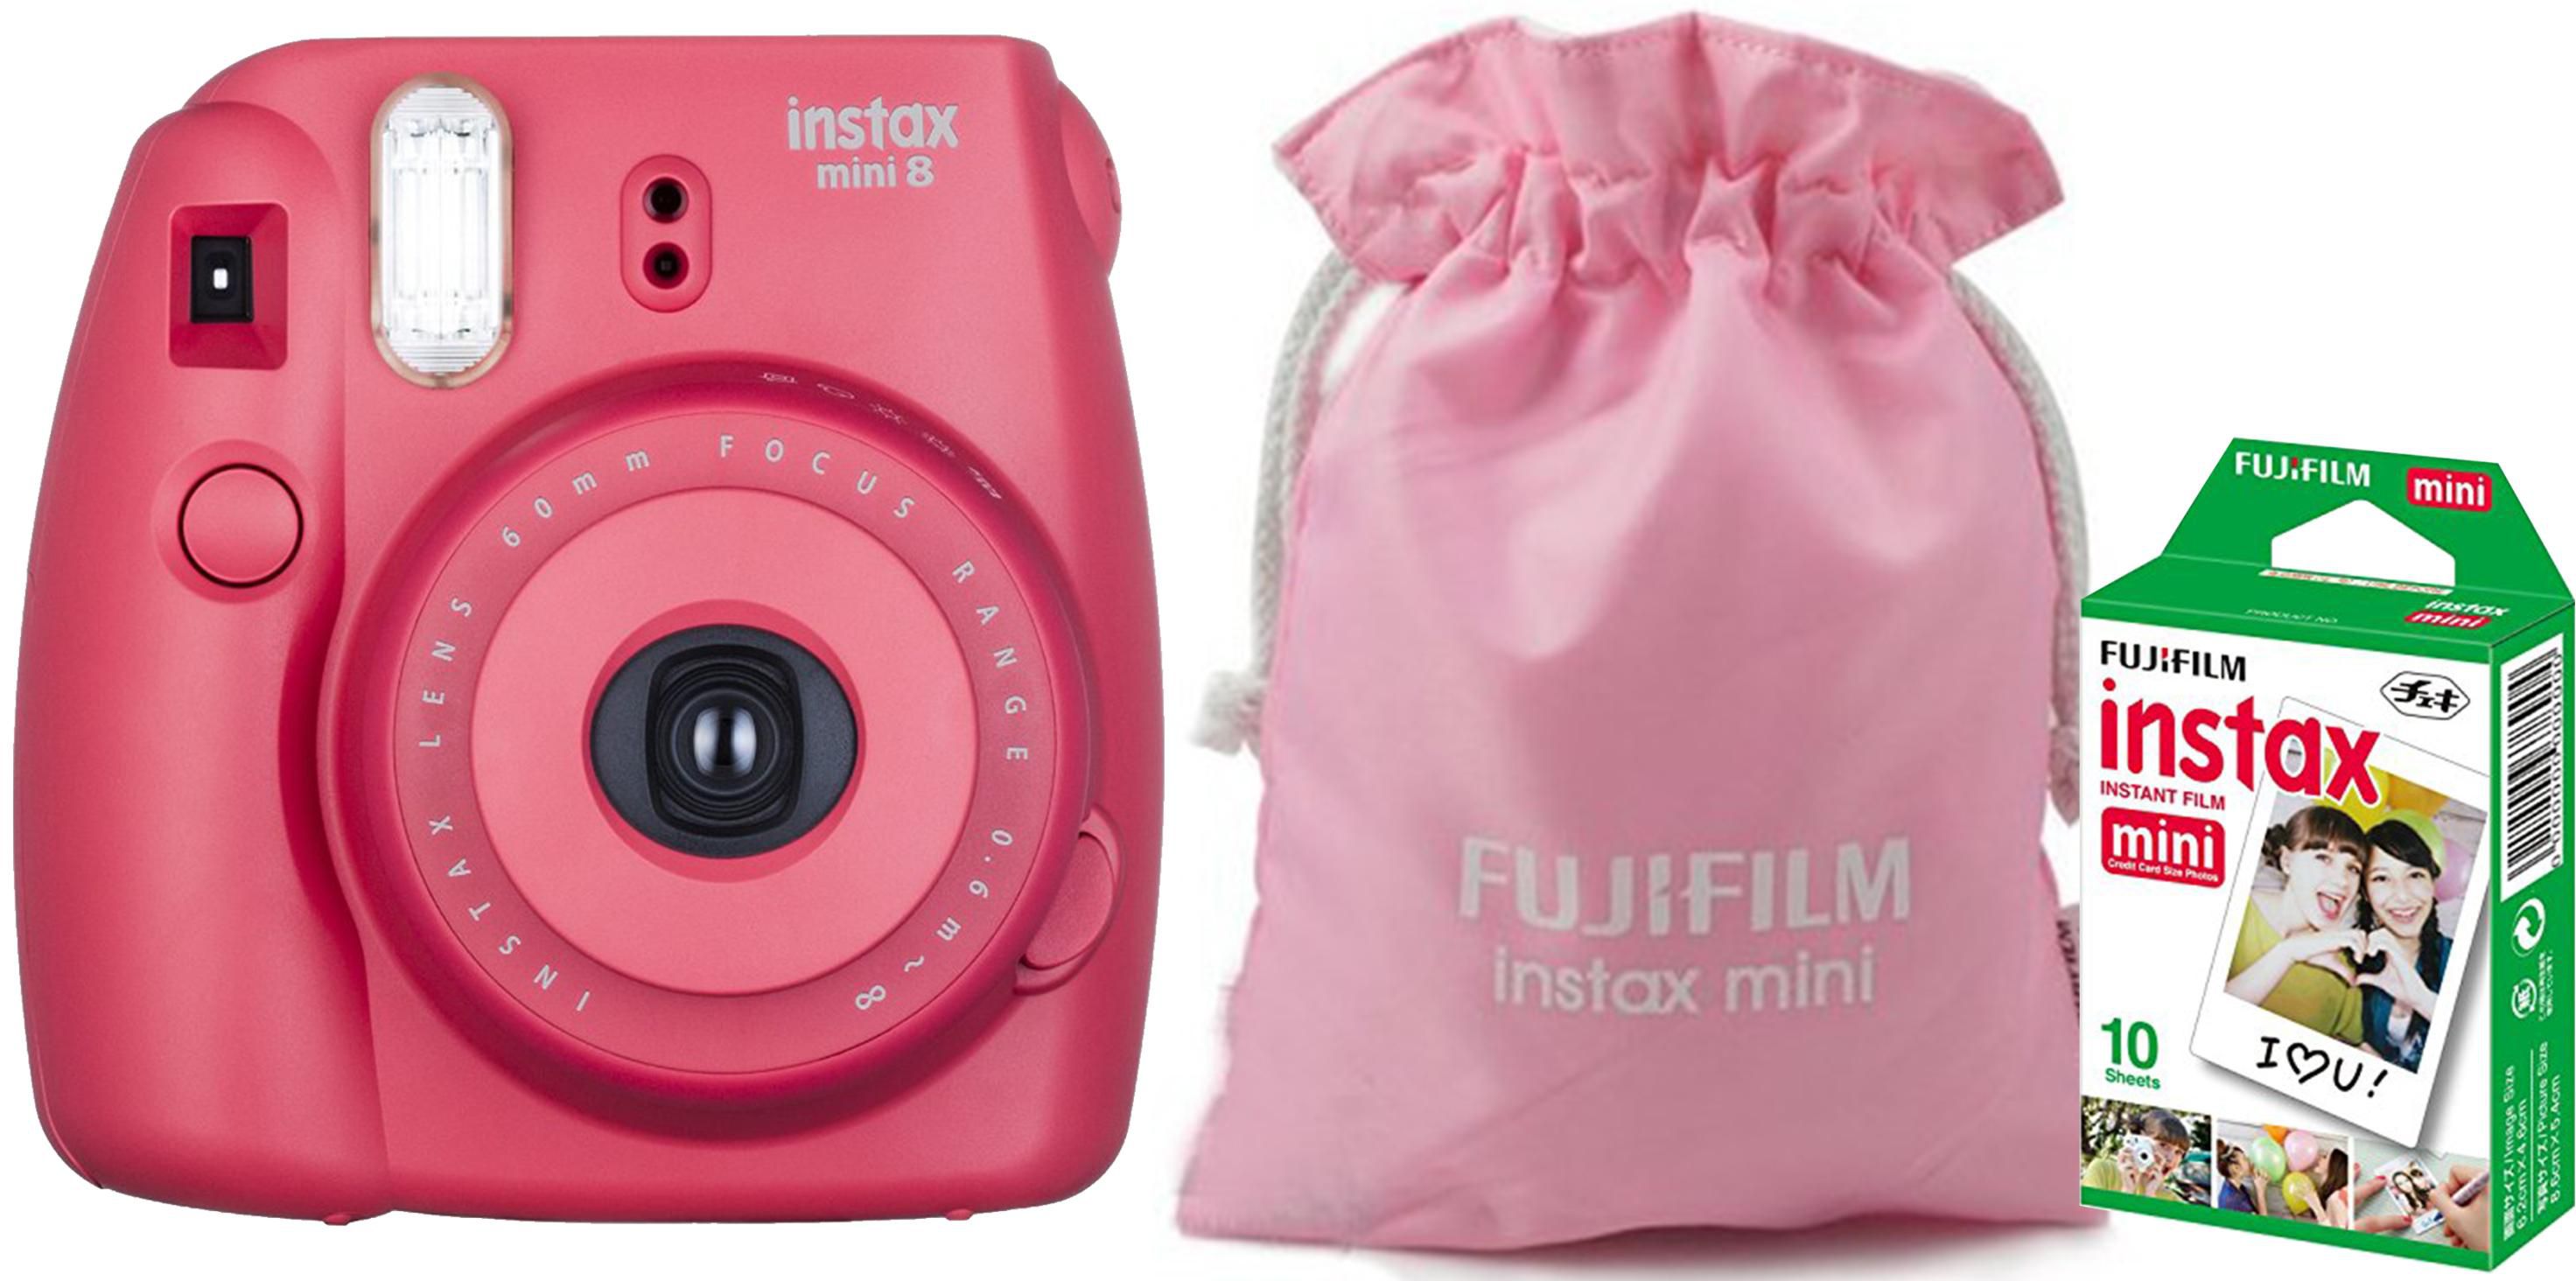 Fujifilm Instax Mini 8 Instant Film Camera Red with Pink Pouch and 10 Film Sheet